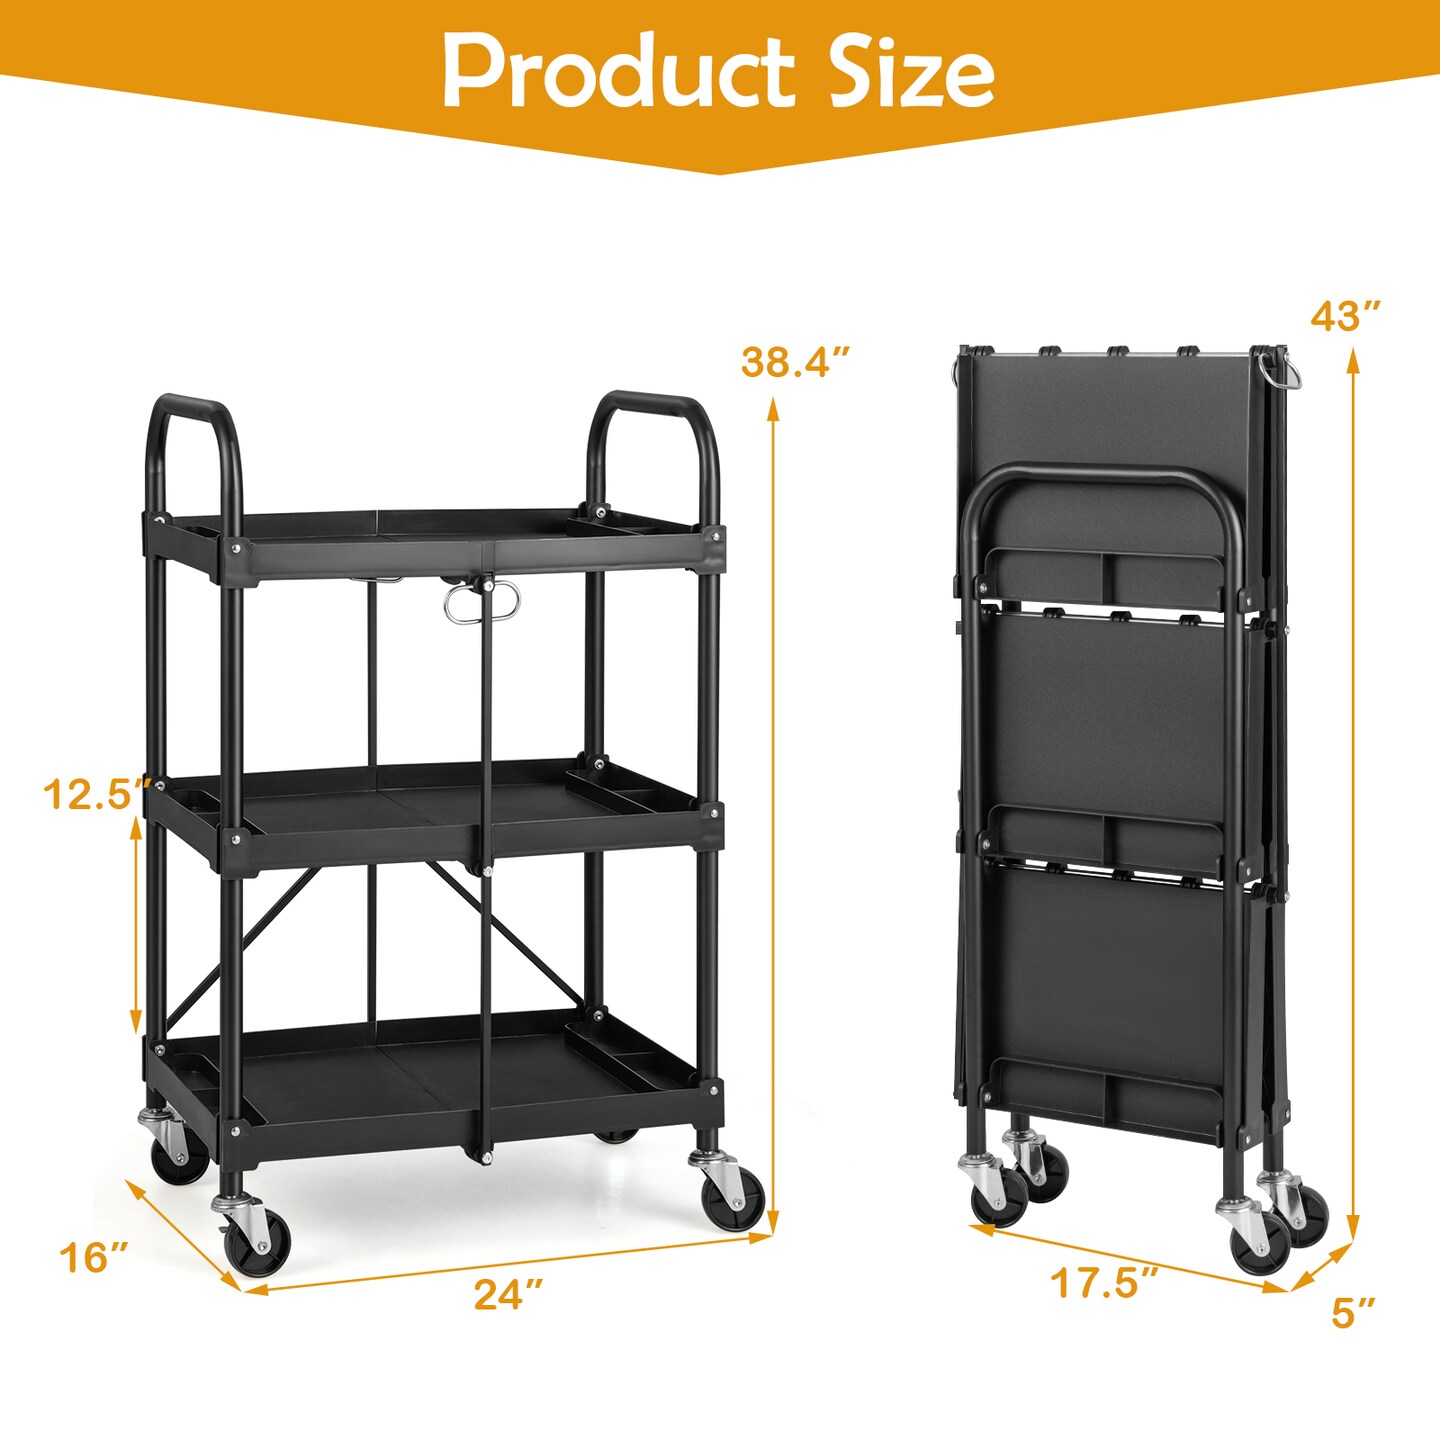 Costway Folding Collapsible Service Cart Heavy-Duty 3-Shelf Tool Cart with 4 Wheels